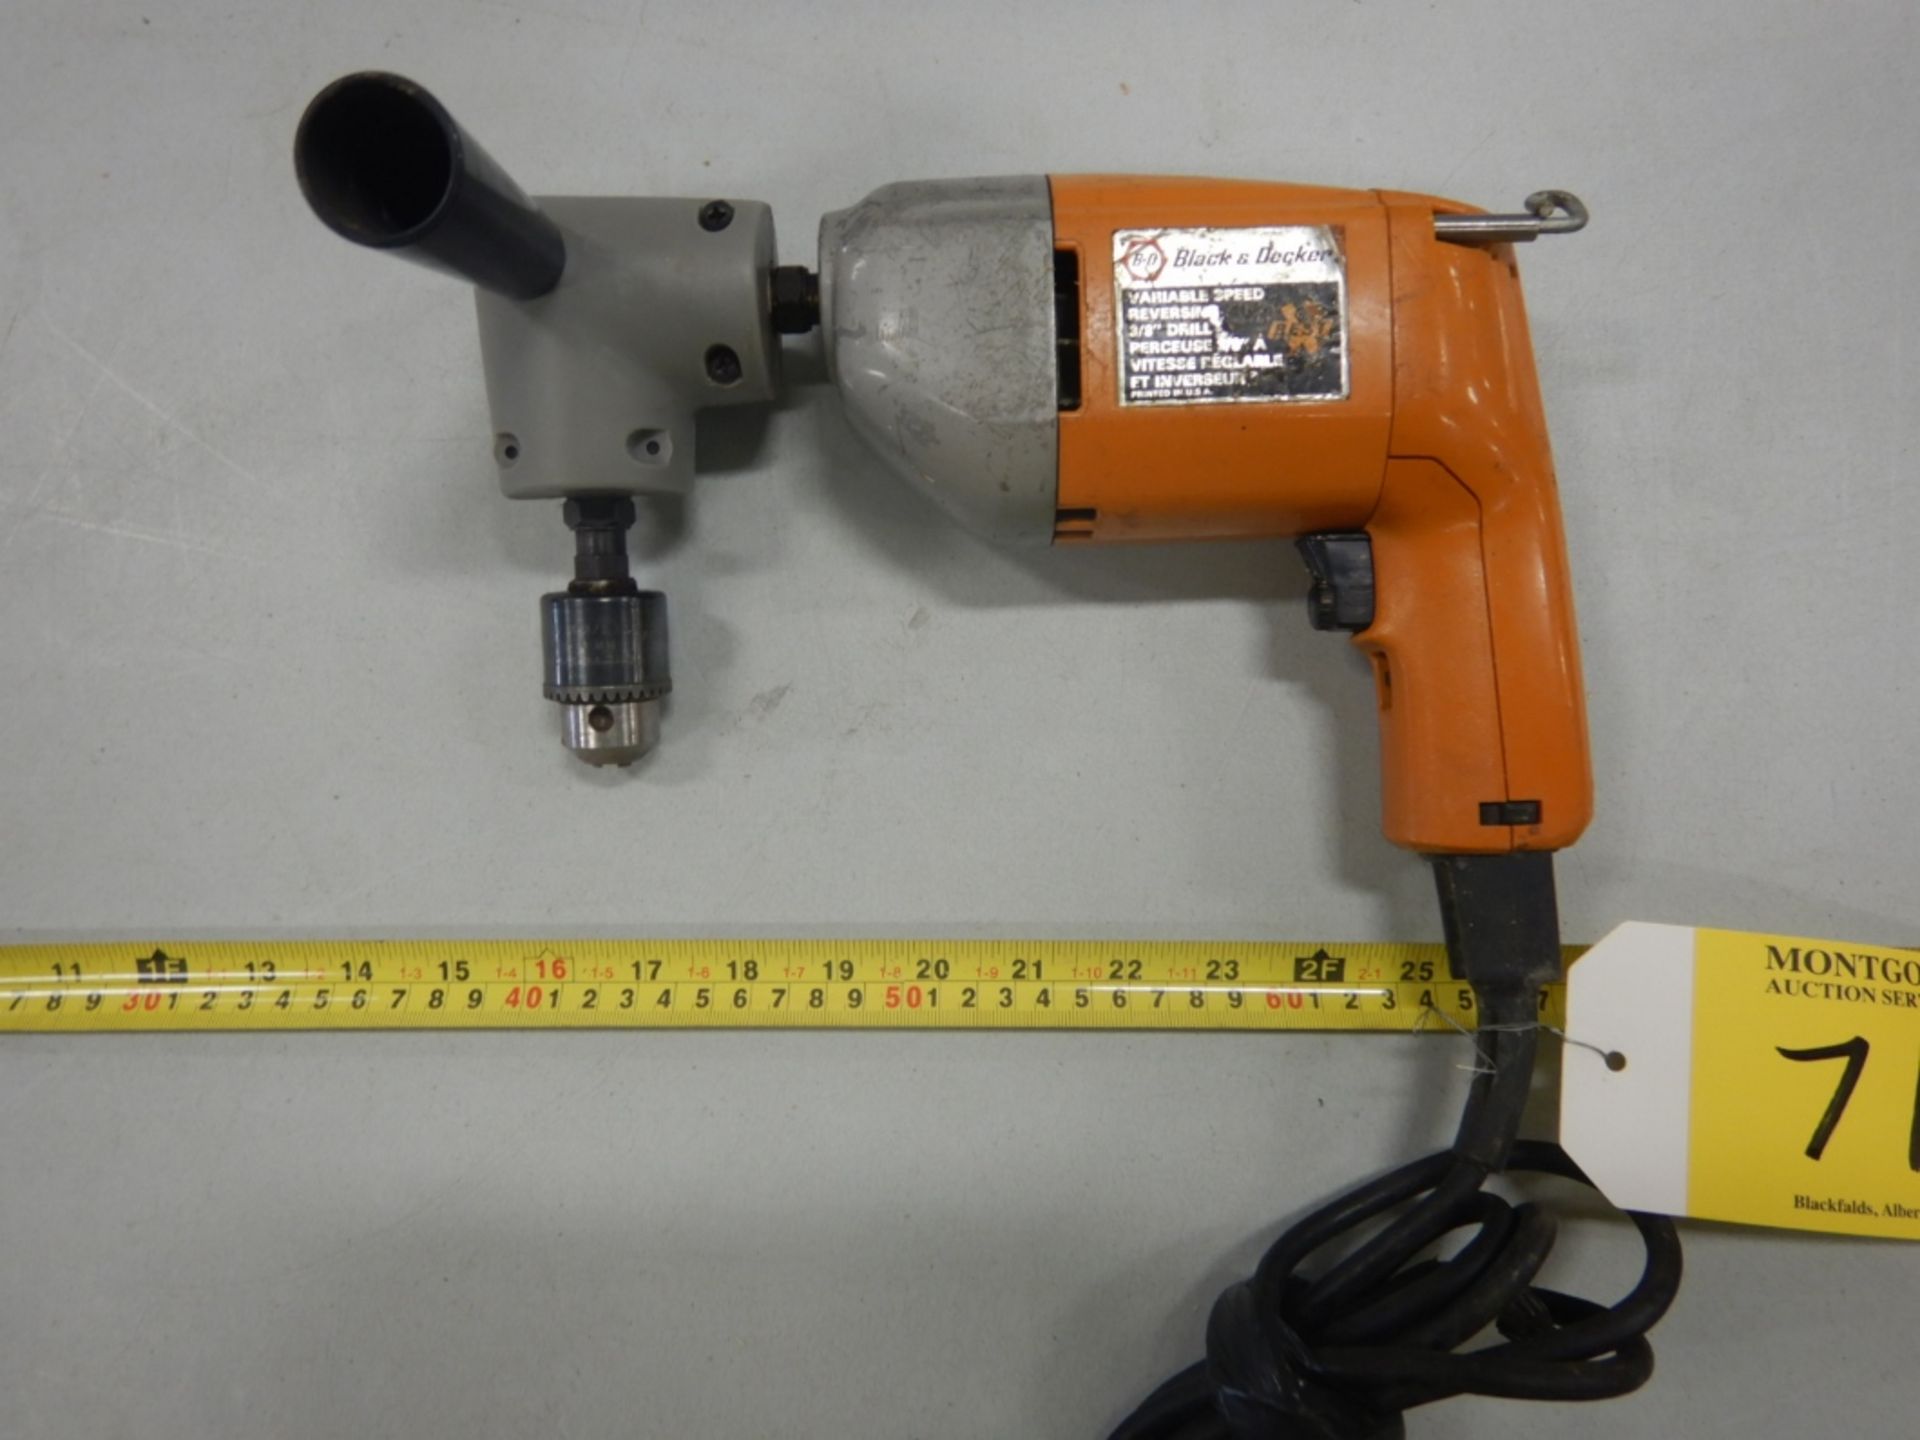 B&D ELEC. VARIABLE SPEED DRILL W/ RIGHT ANGLE DRILLING ATTACHMENT